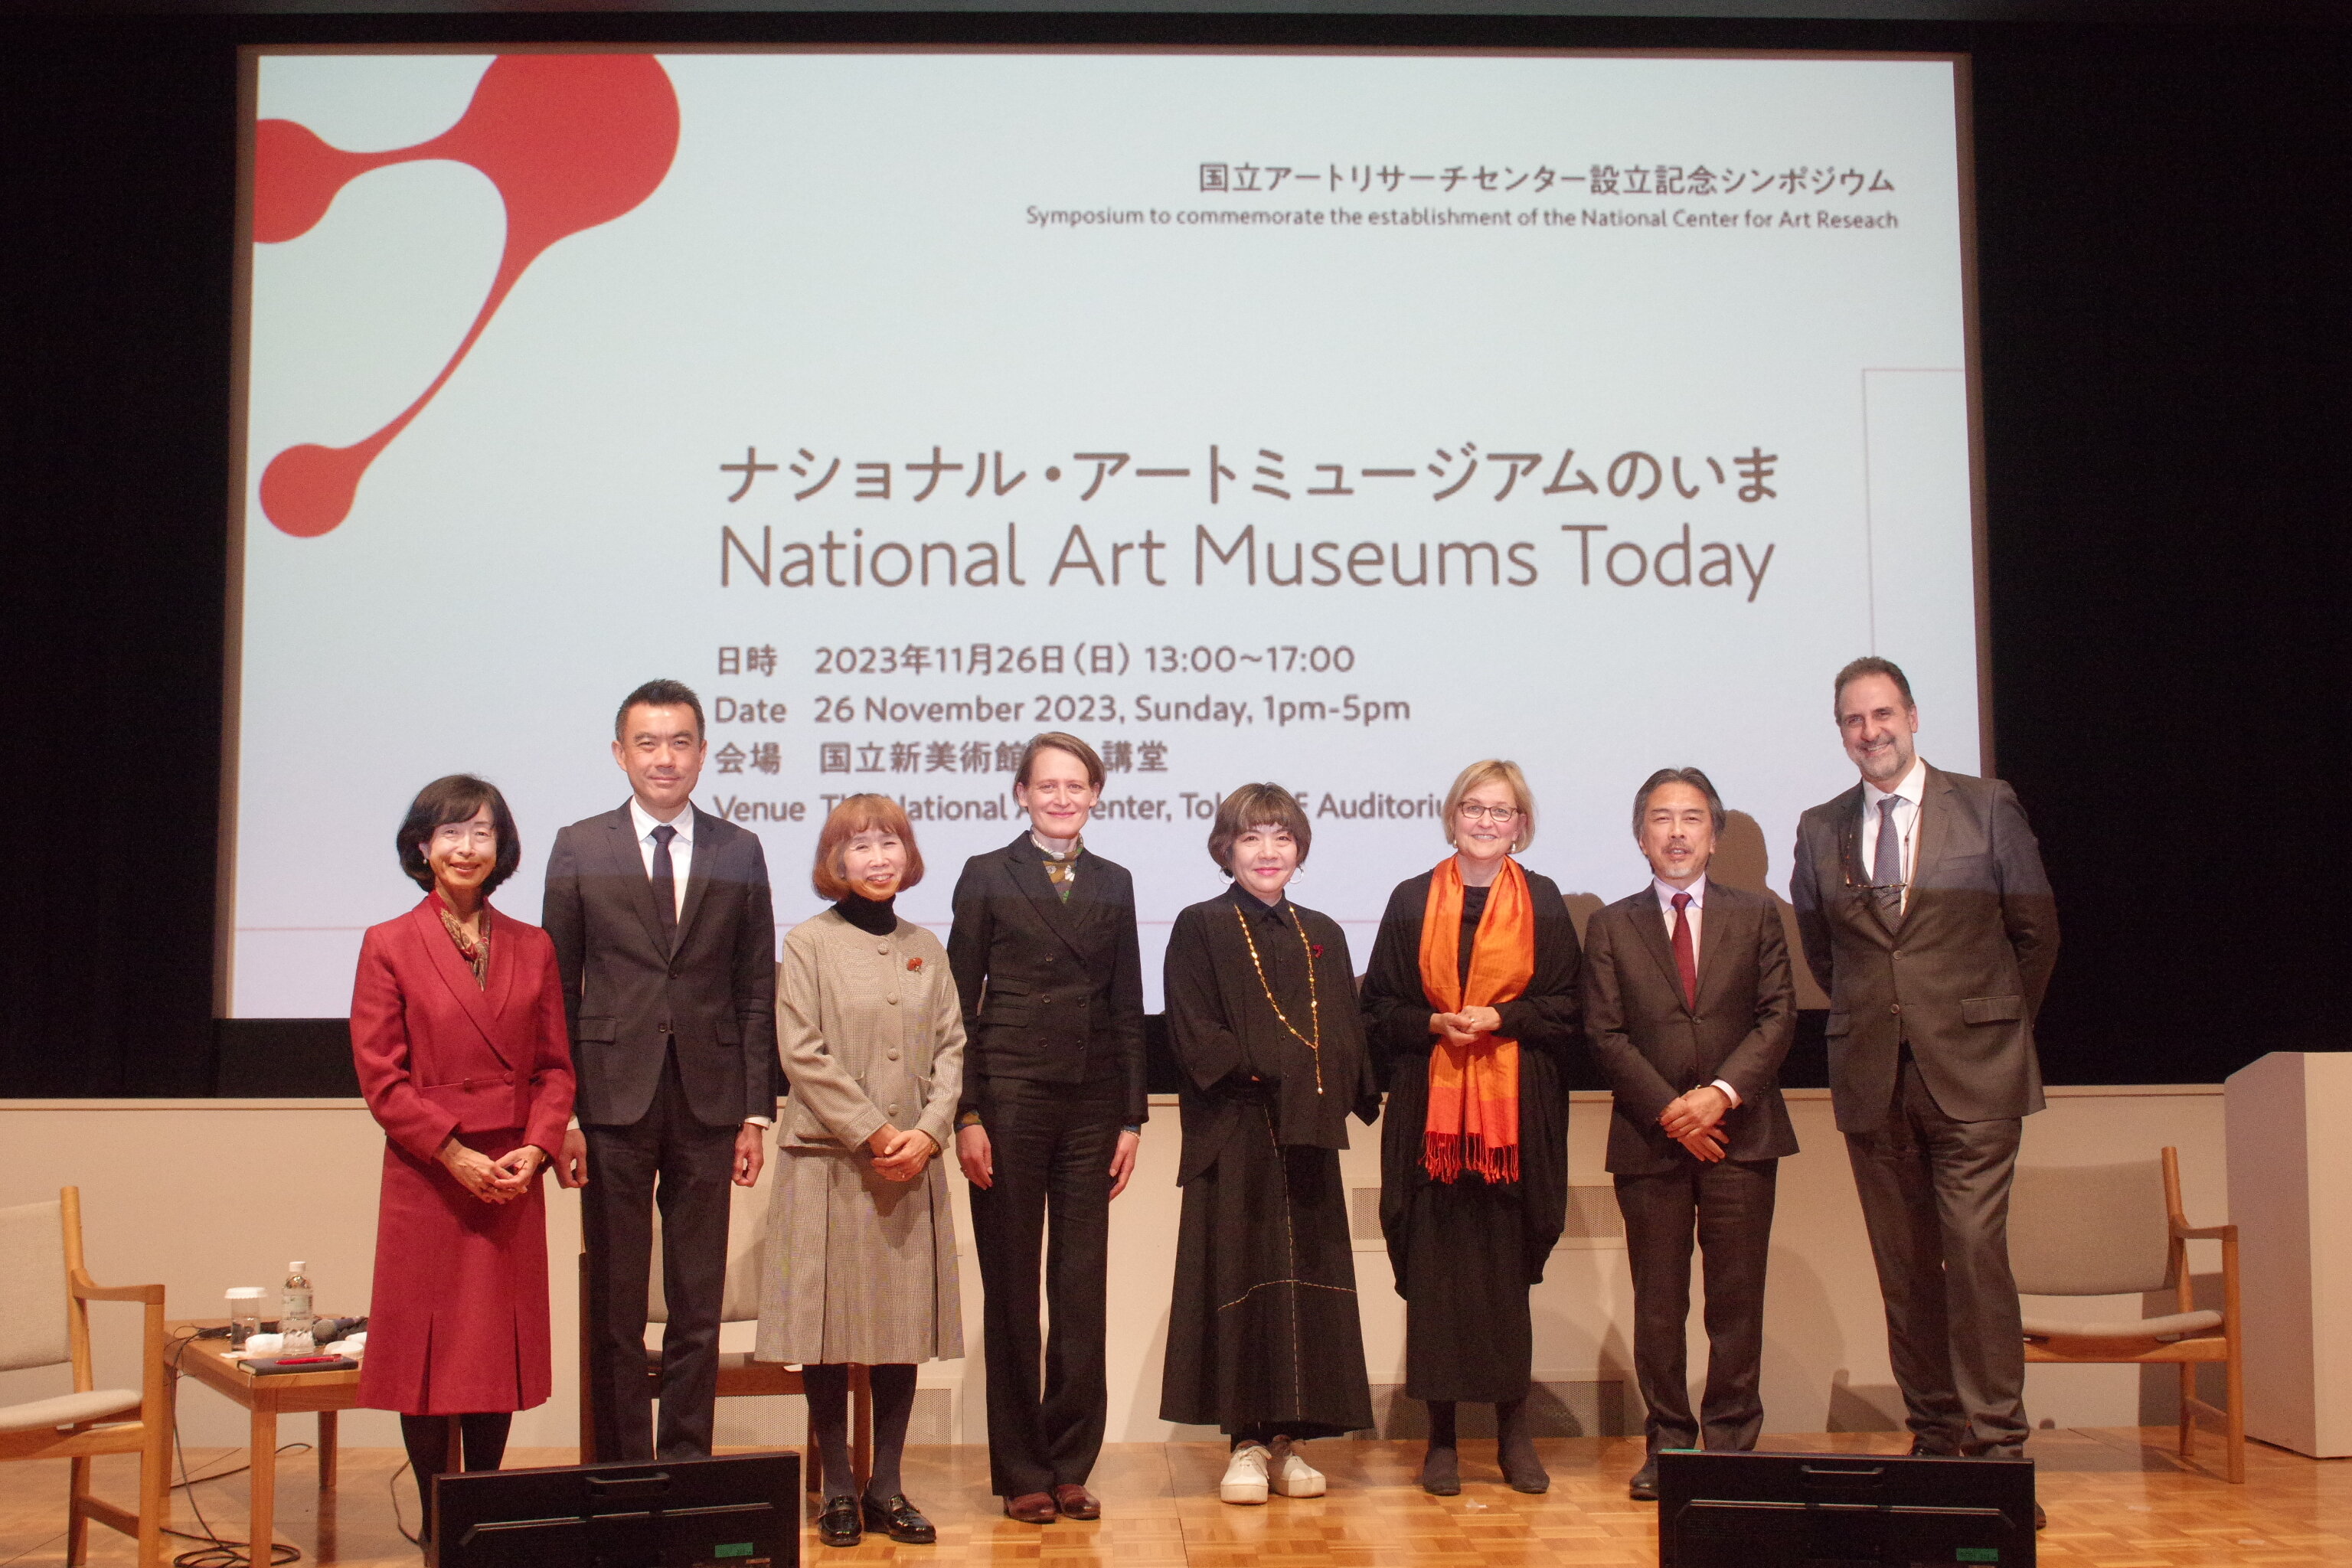 [Symposium Report] The National Center for Art Research Symposium 